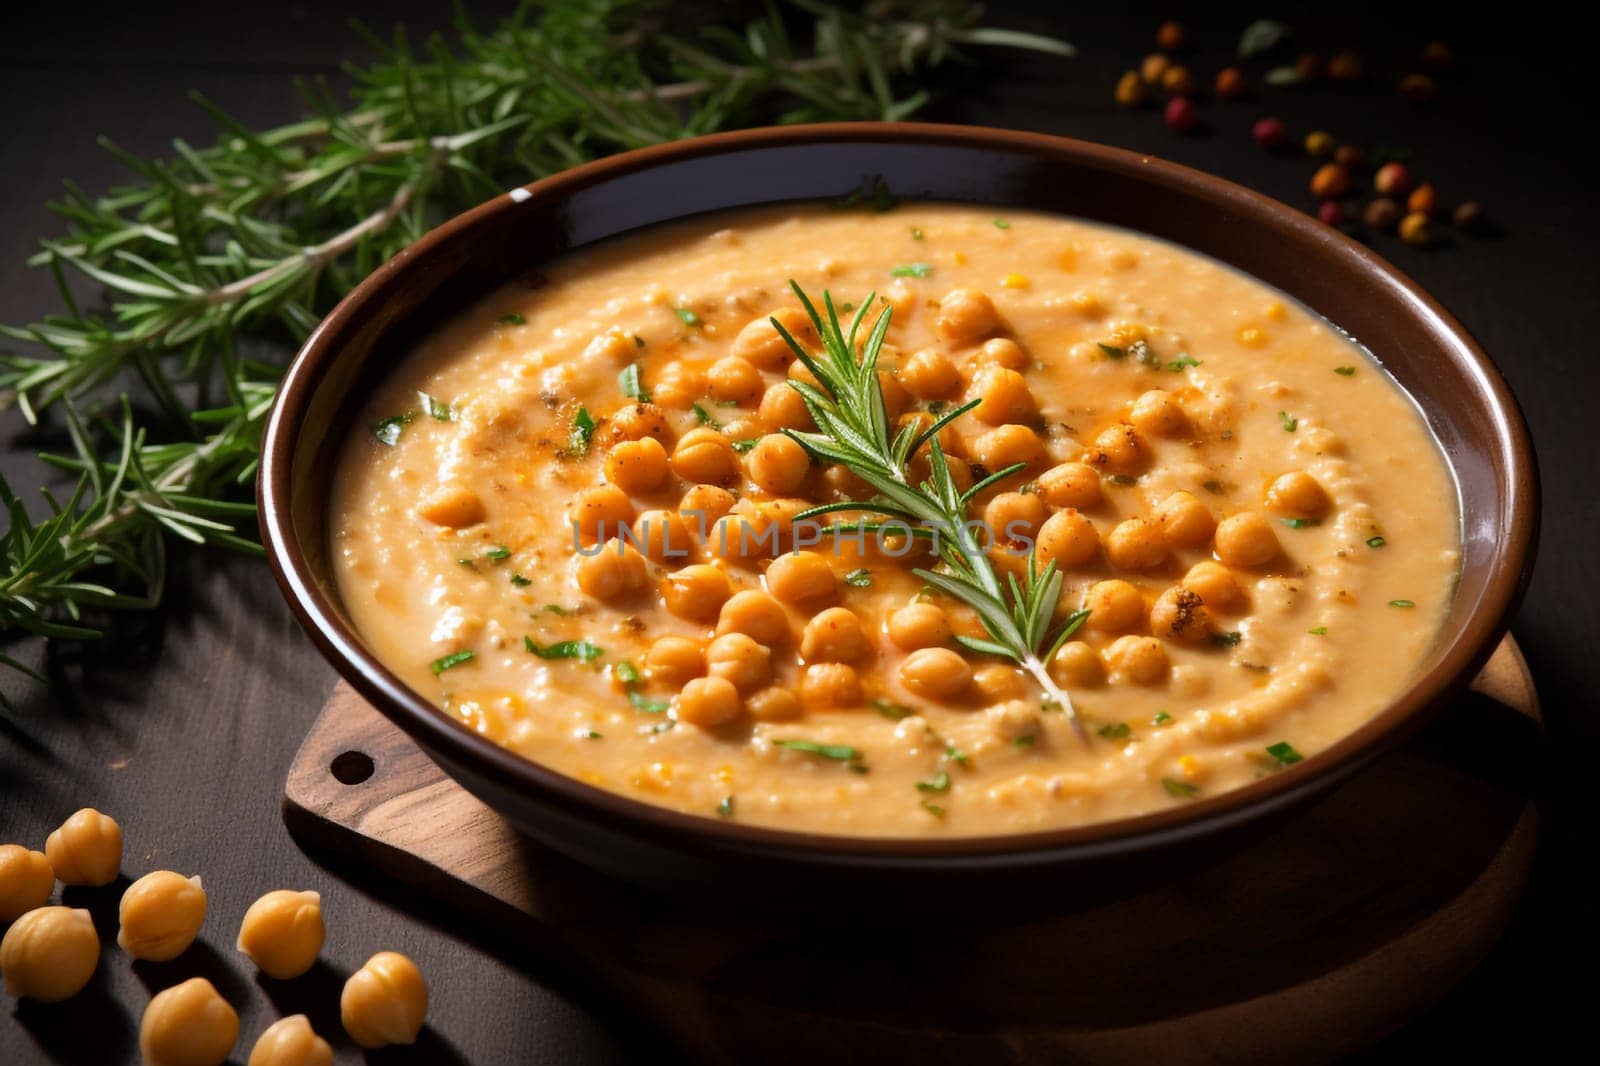 Chickpea soup, traditional Italian winter dish, in Umbria. A warm and nourishing soup made with chickpeas and flavors such as rosemary and garlic. on a white plate in a elegant restaurant decorated for Christmas time. Healthy vegetarian food